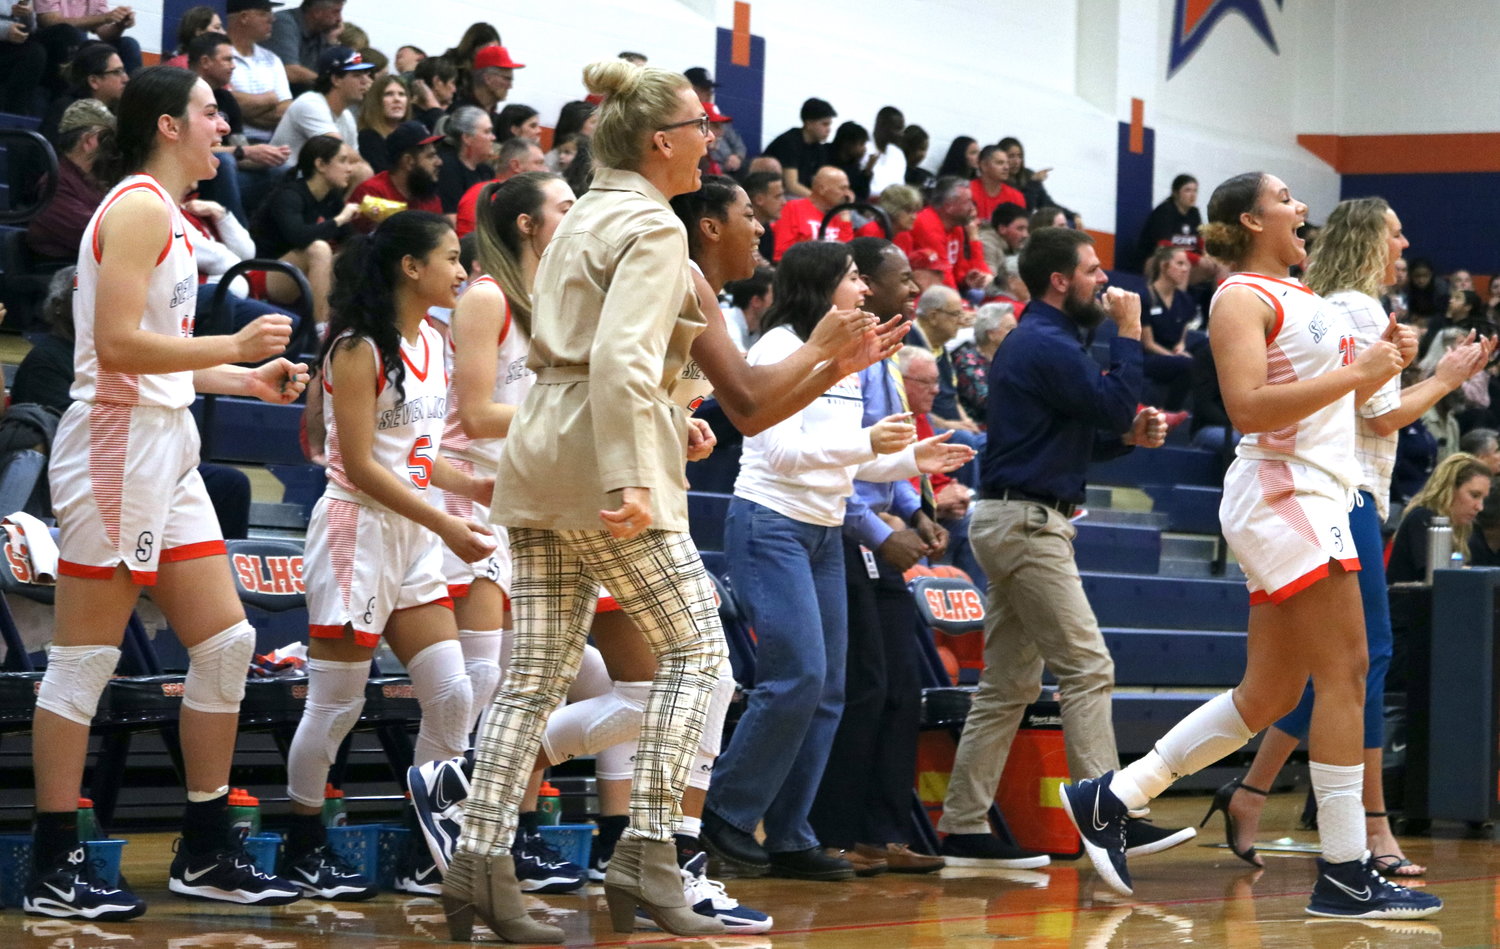 The Seven Lakes bench celebrates after the Spartans made a basket during Tuesday's game between Katy and Seven Lakes at the Seven Lakes gym.